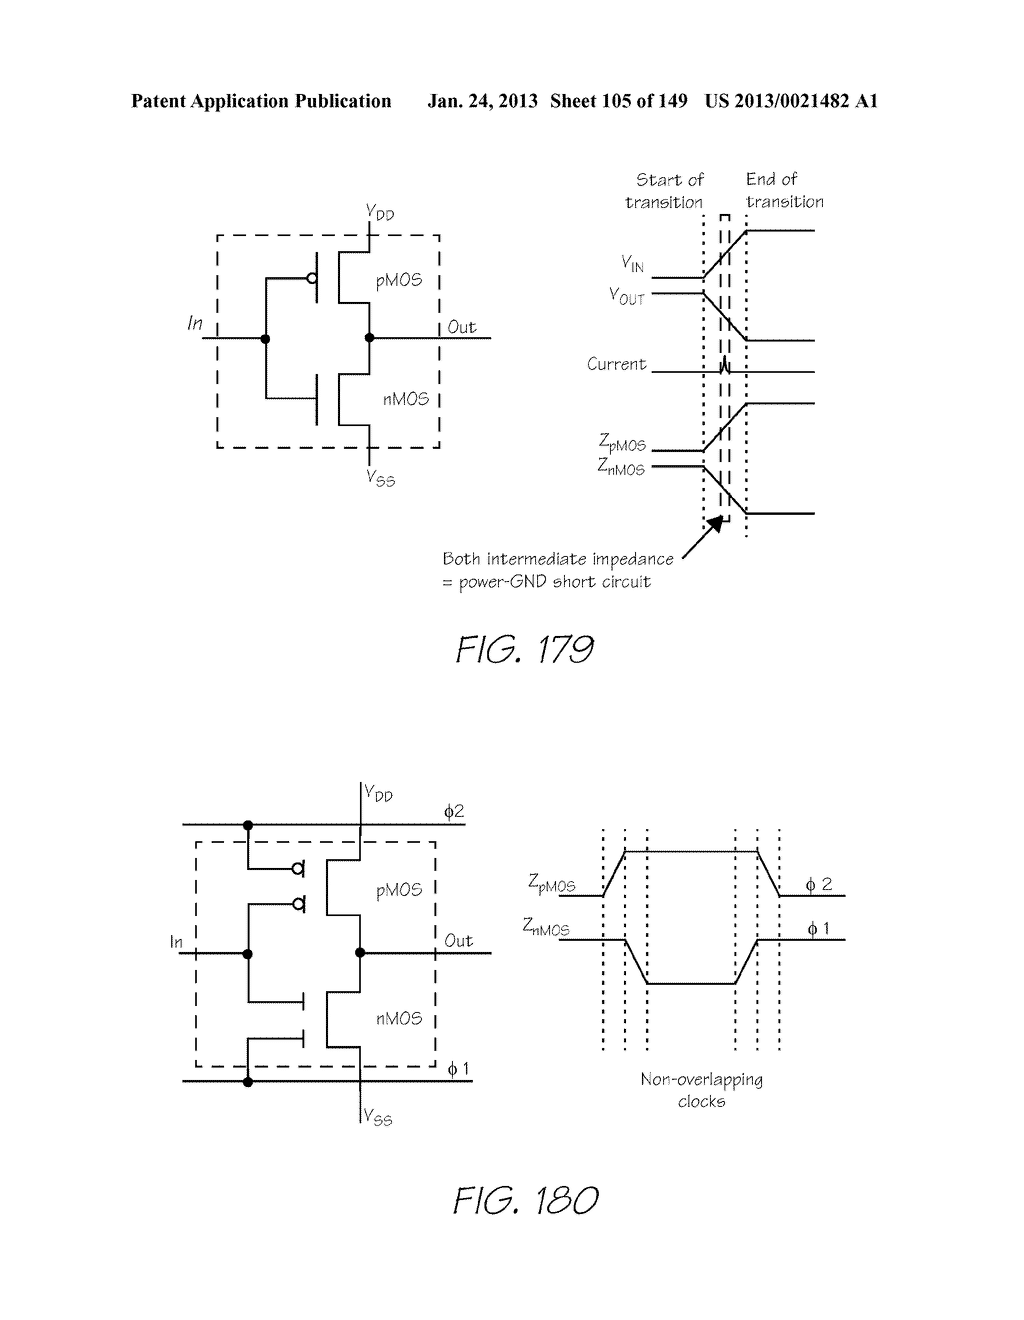 HANDHELD IMAGING DEVICE WITH SYSTEM-ON-CHIP MICROCONTROLLER INCORPORATING     ON SHARED WAFER IMAGE PROCESSOR AND IMAGE SENSOR - diagram, schematic, and image 106